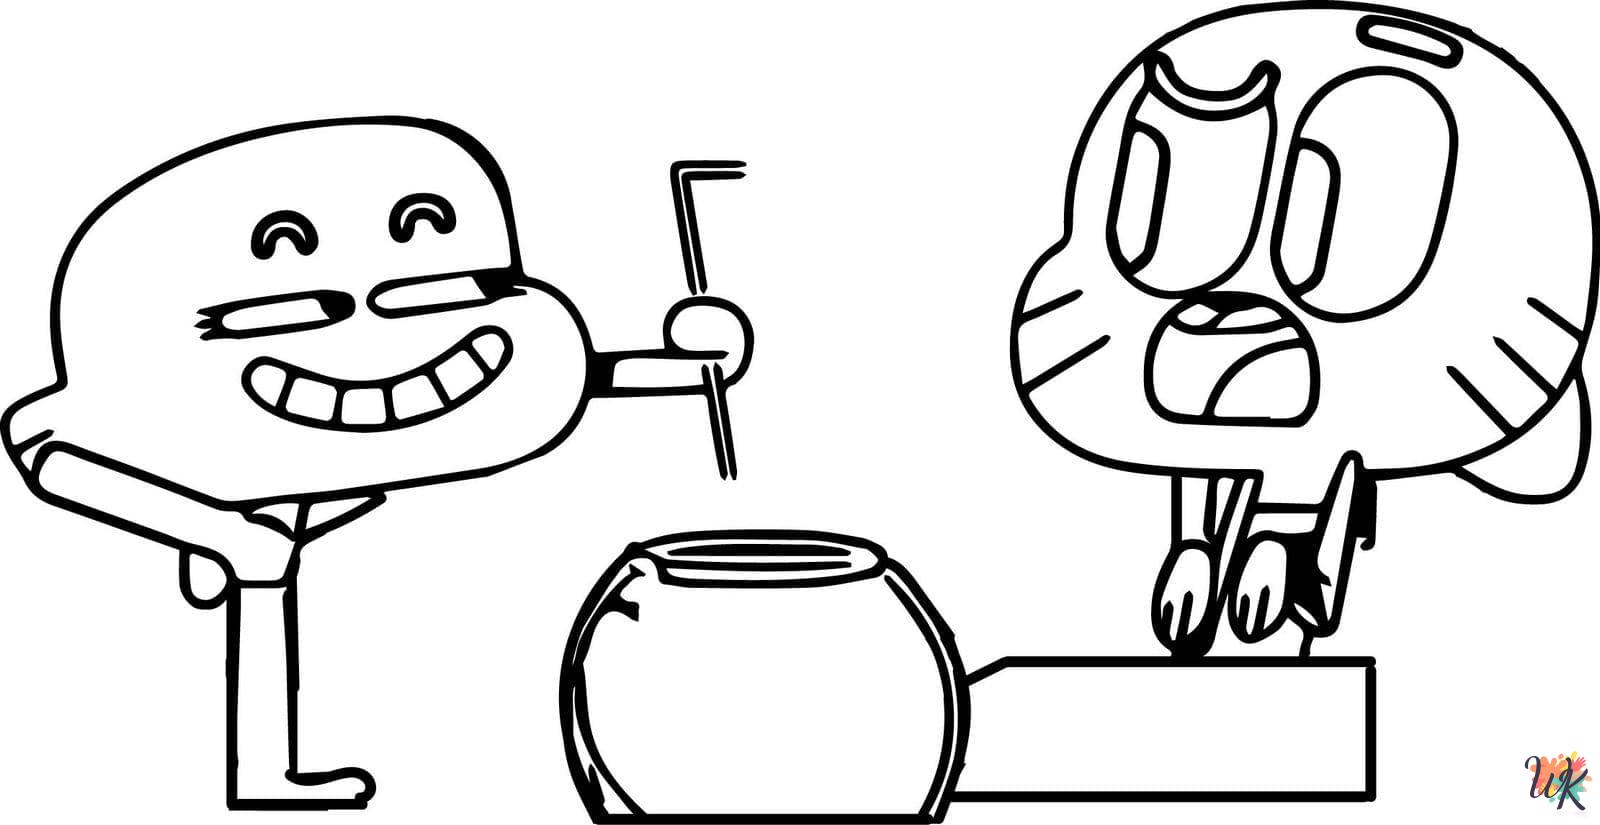 Gumball themed coloring pages 1